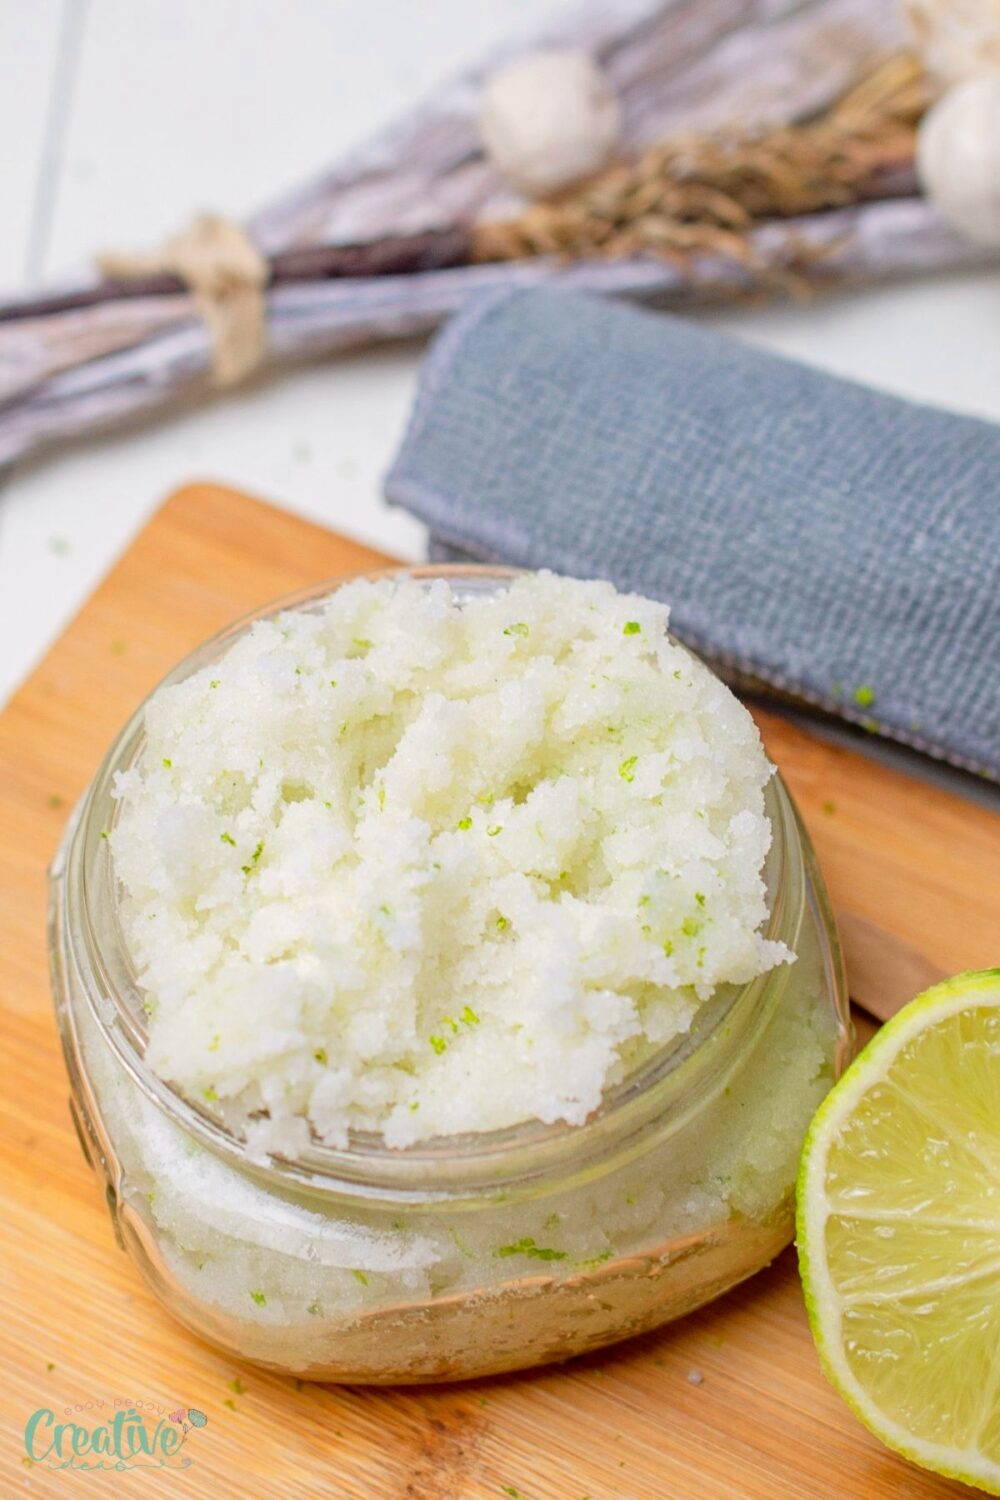 Luxurious lime sugar scrub recipe for glowing, smooth skin. Exfoliate with lime sugar scrub and moisturize with coconut oil.